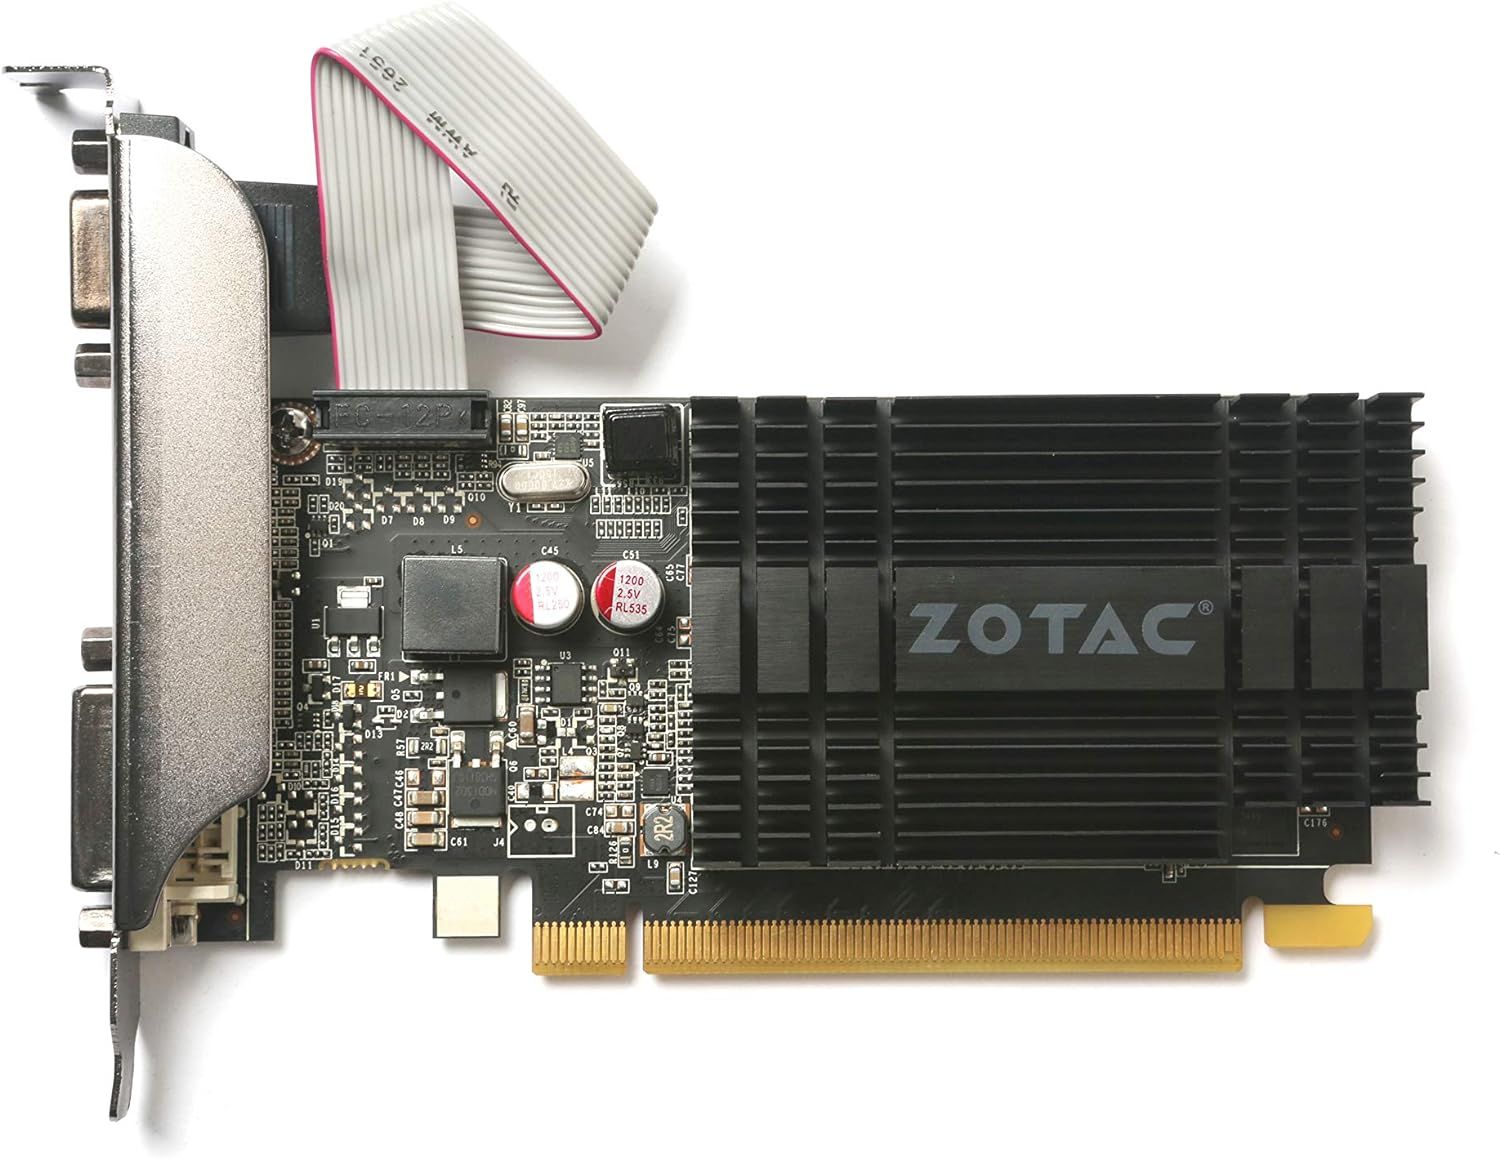 A ZOTAC GeForce GT 710 passively-cooled graphics card.